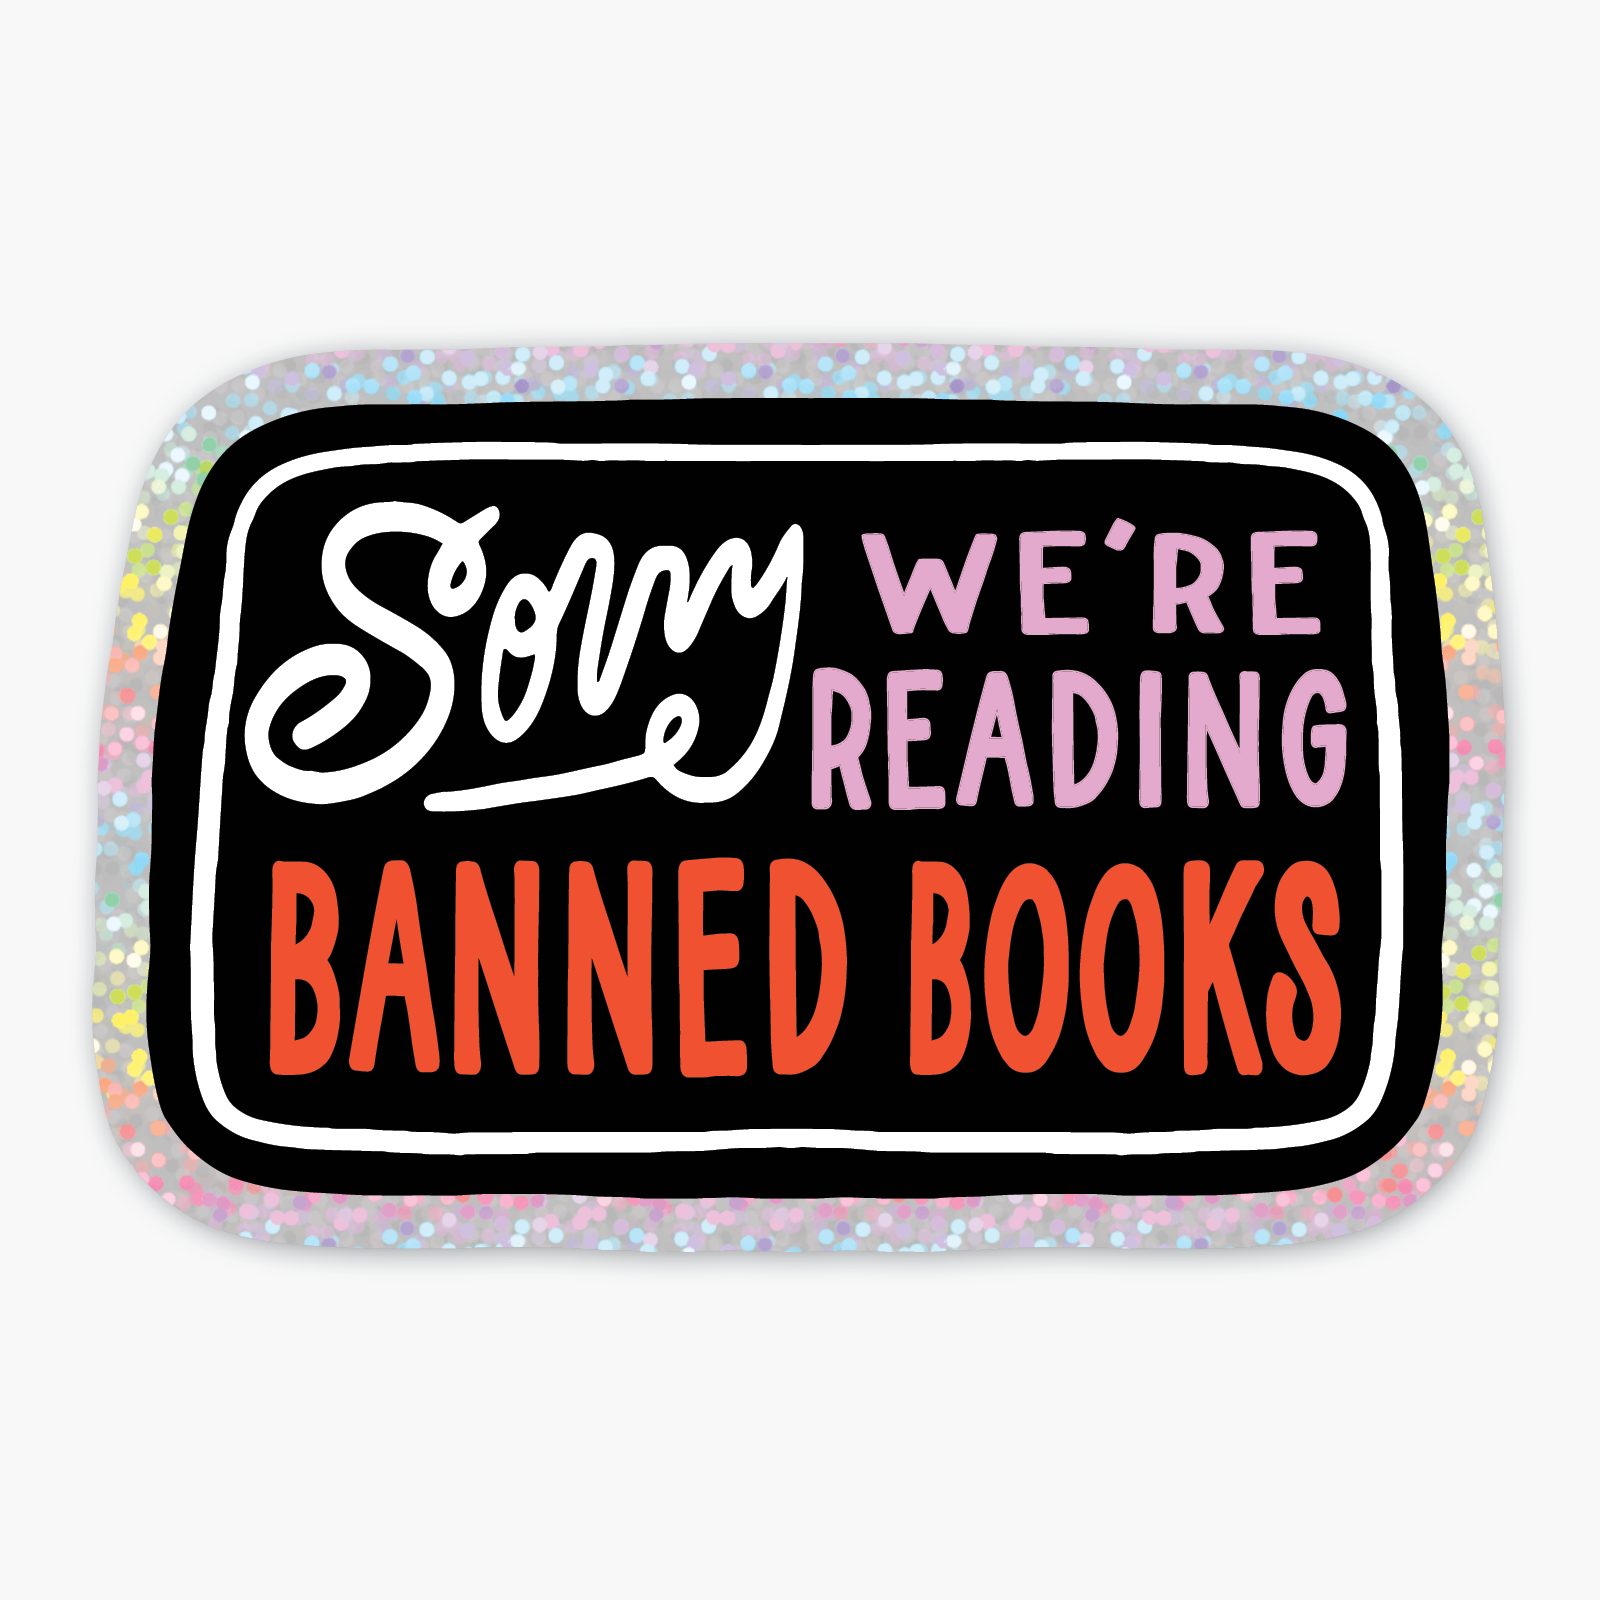 "Sorry, We're Reading Banned Books" Glitter Sticker